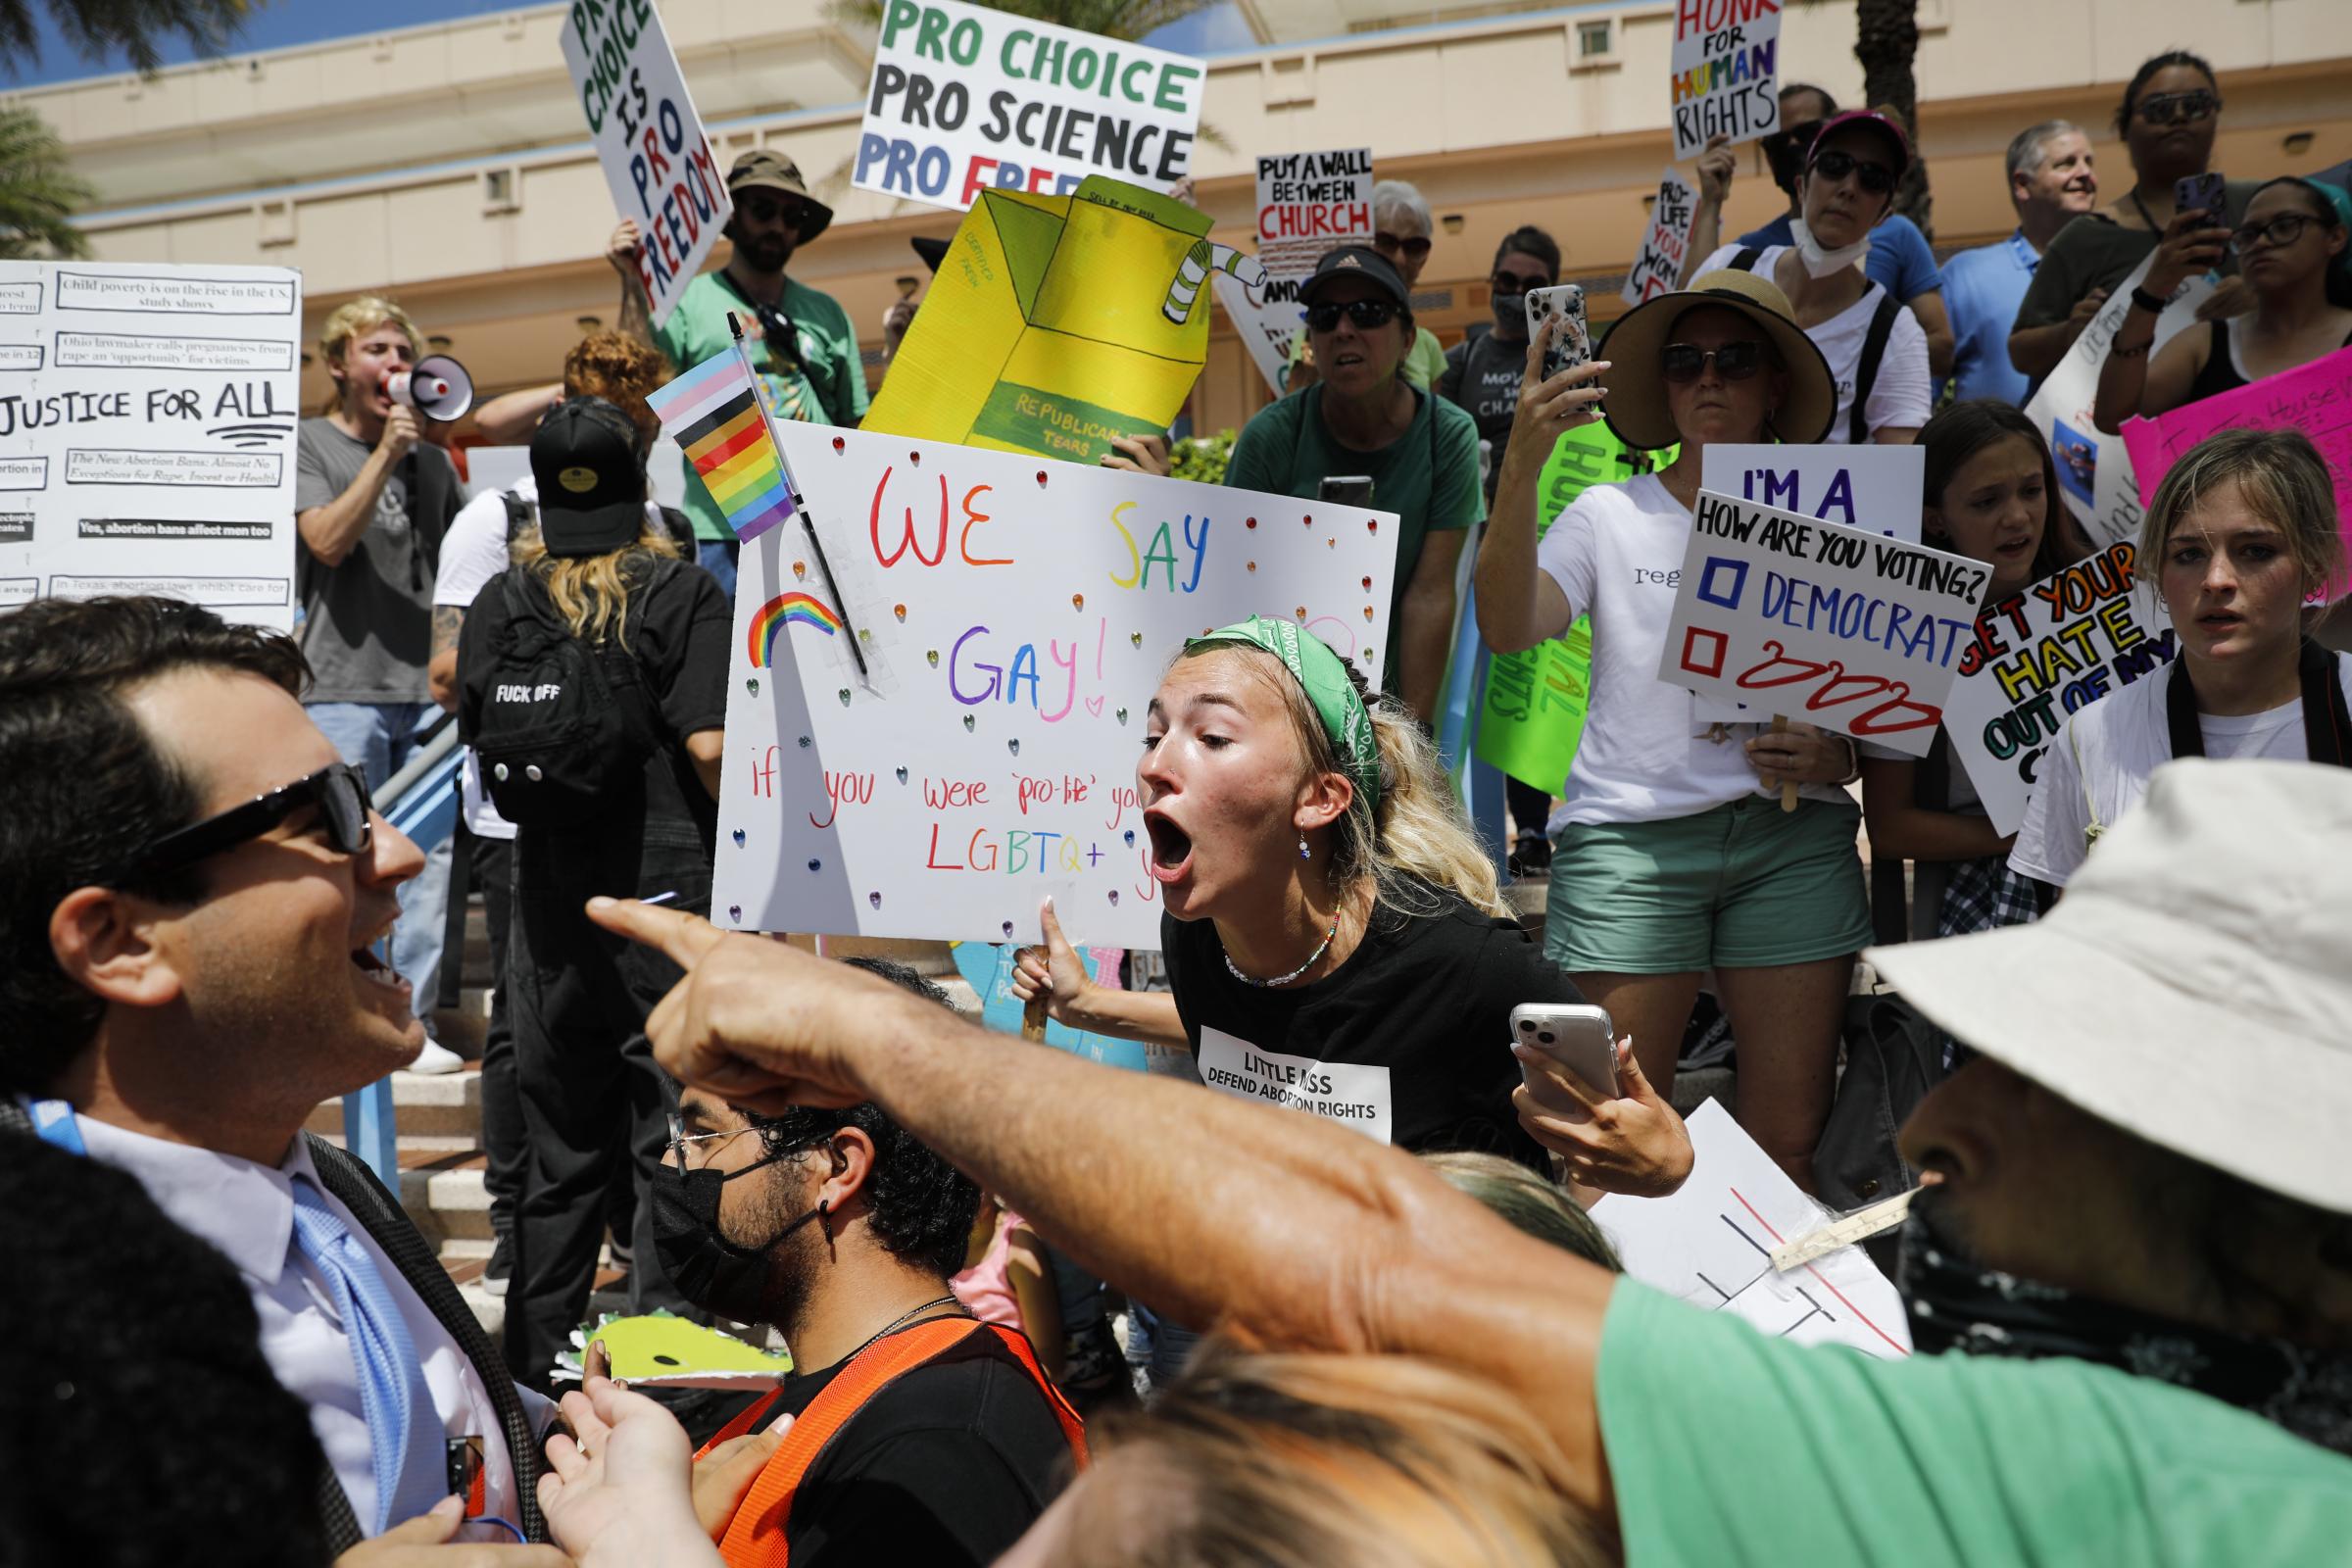 slideshow - A demonstrator argues with a conservative during a protest outside the Tampa Convention Center...